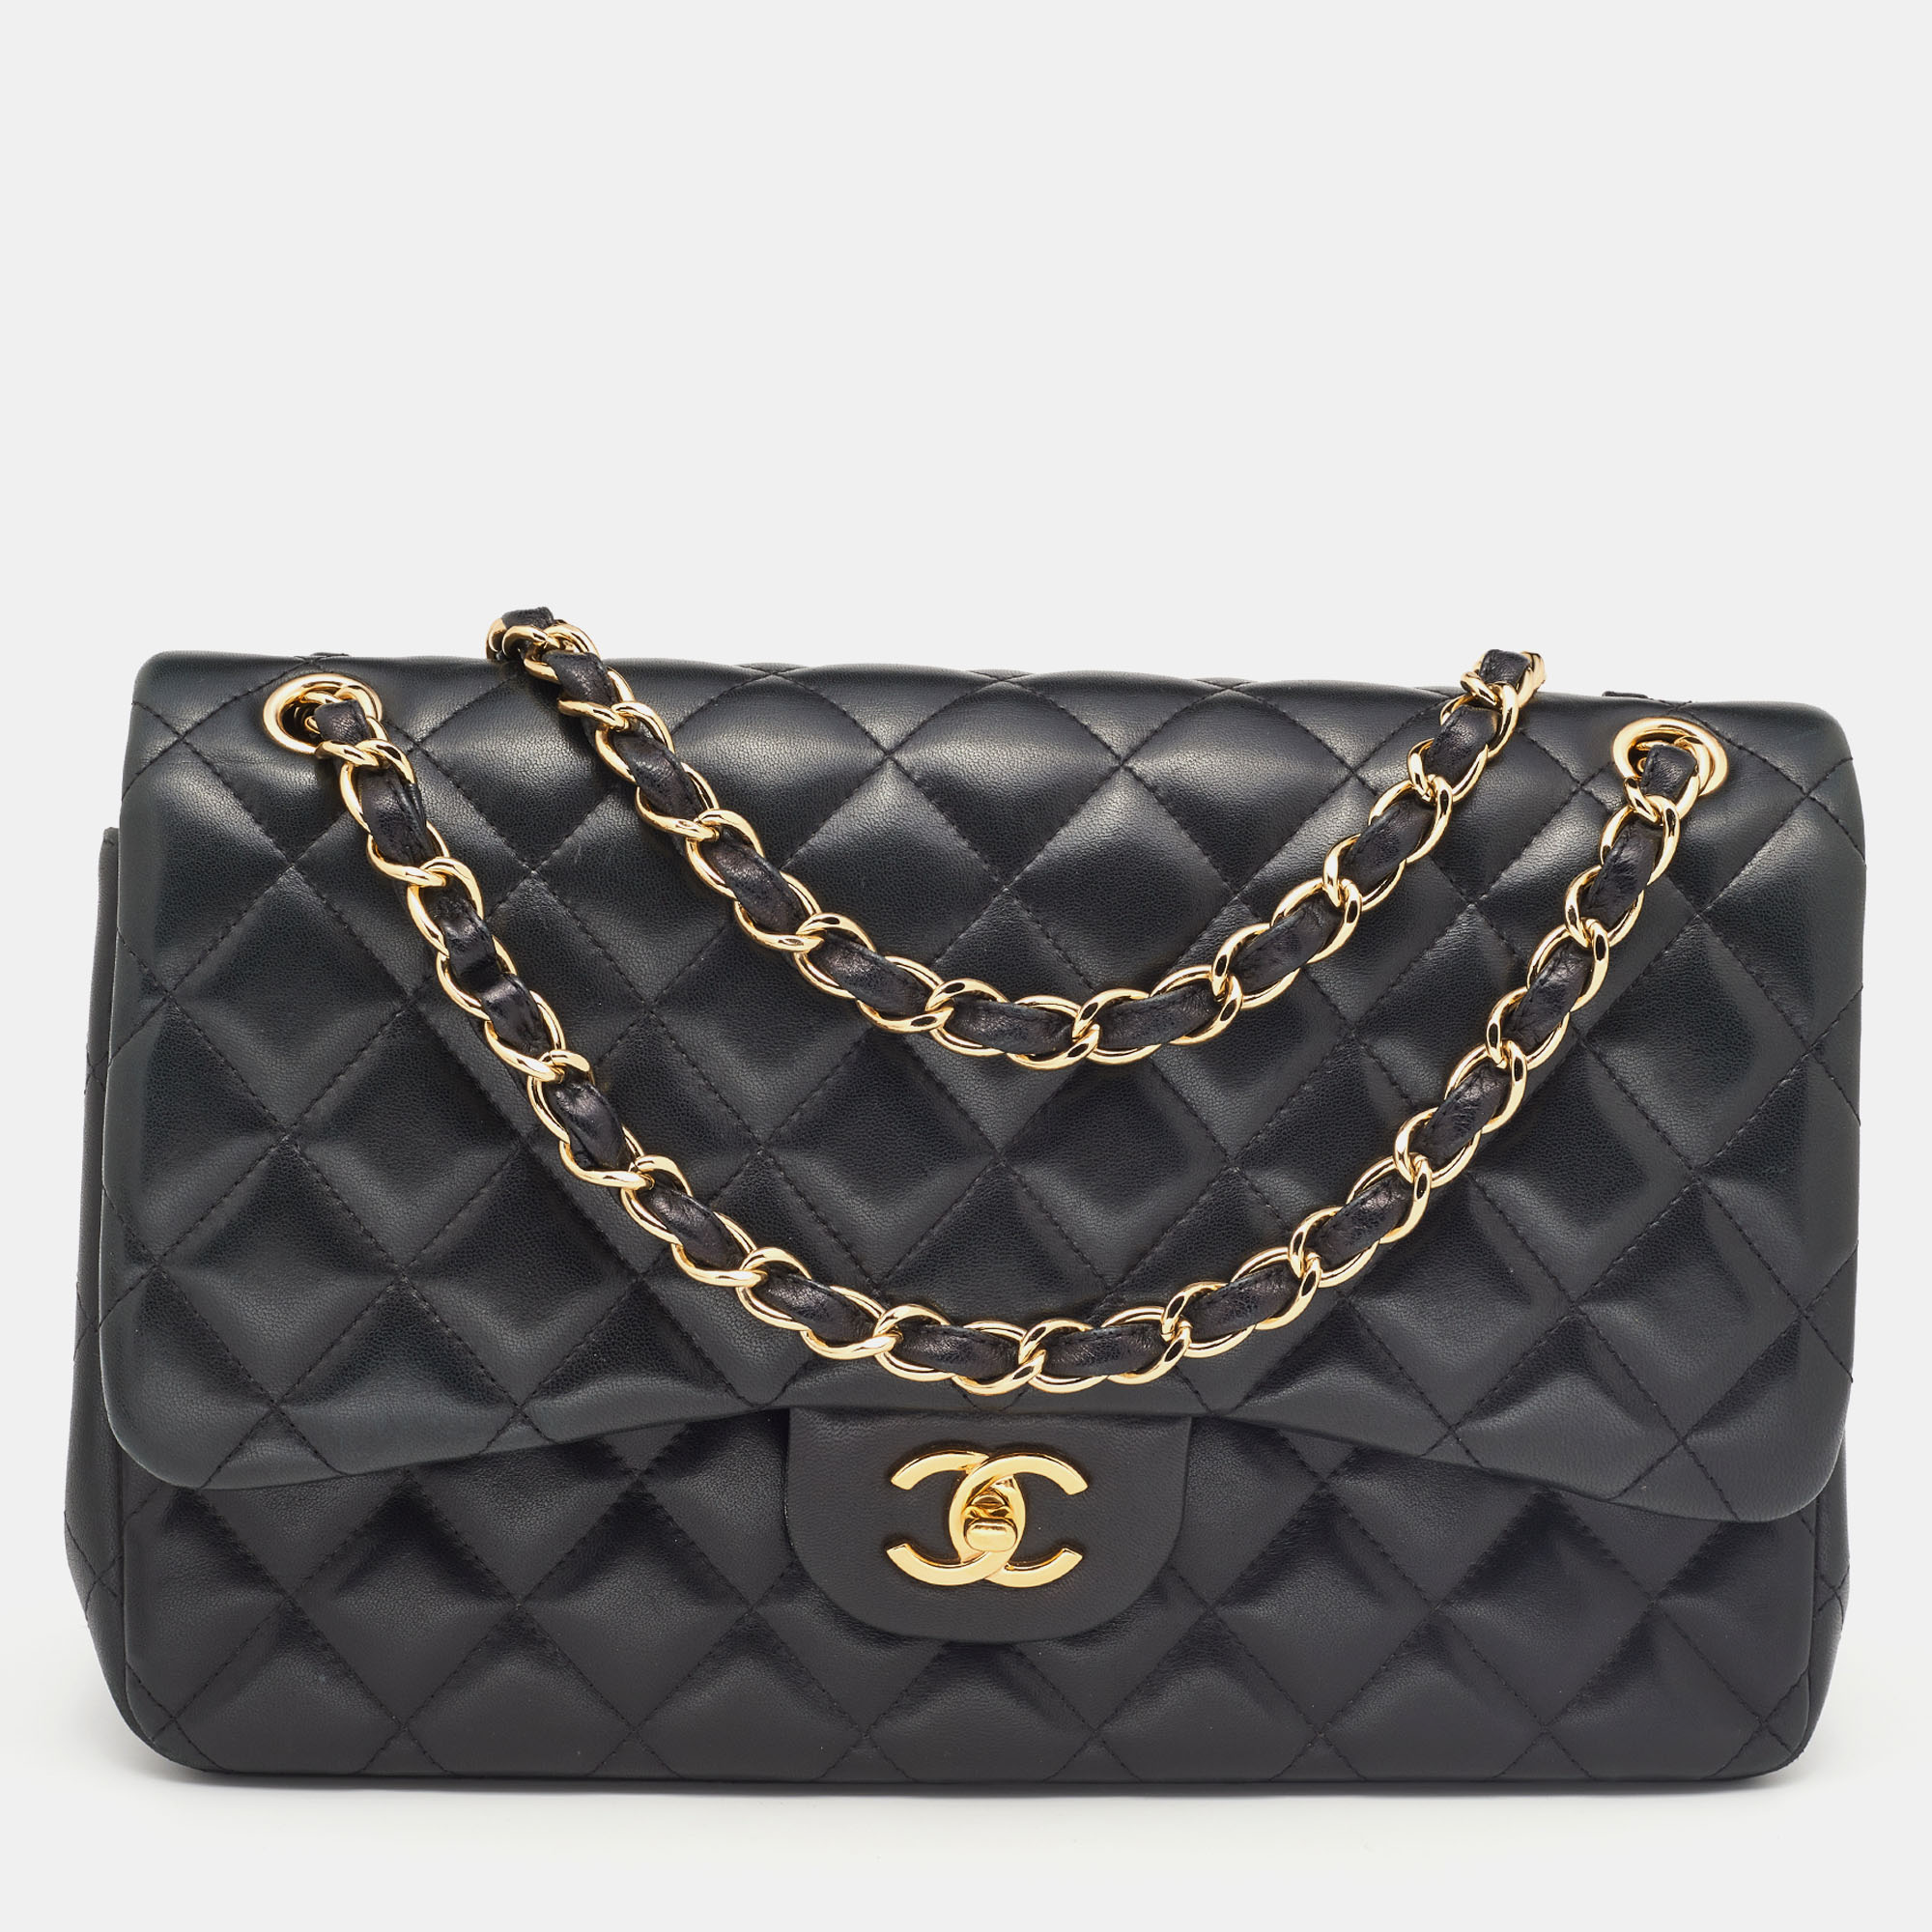 Pre-owned Chanel Black Quilted Leather Jumbo Classic Double Flap Bag